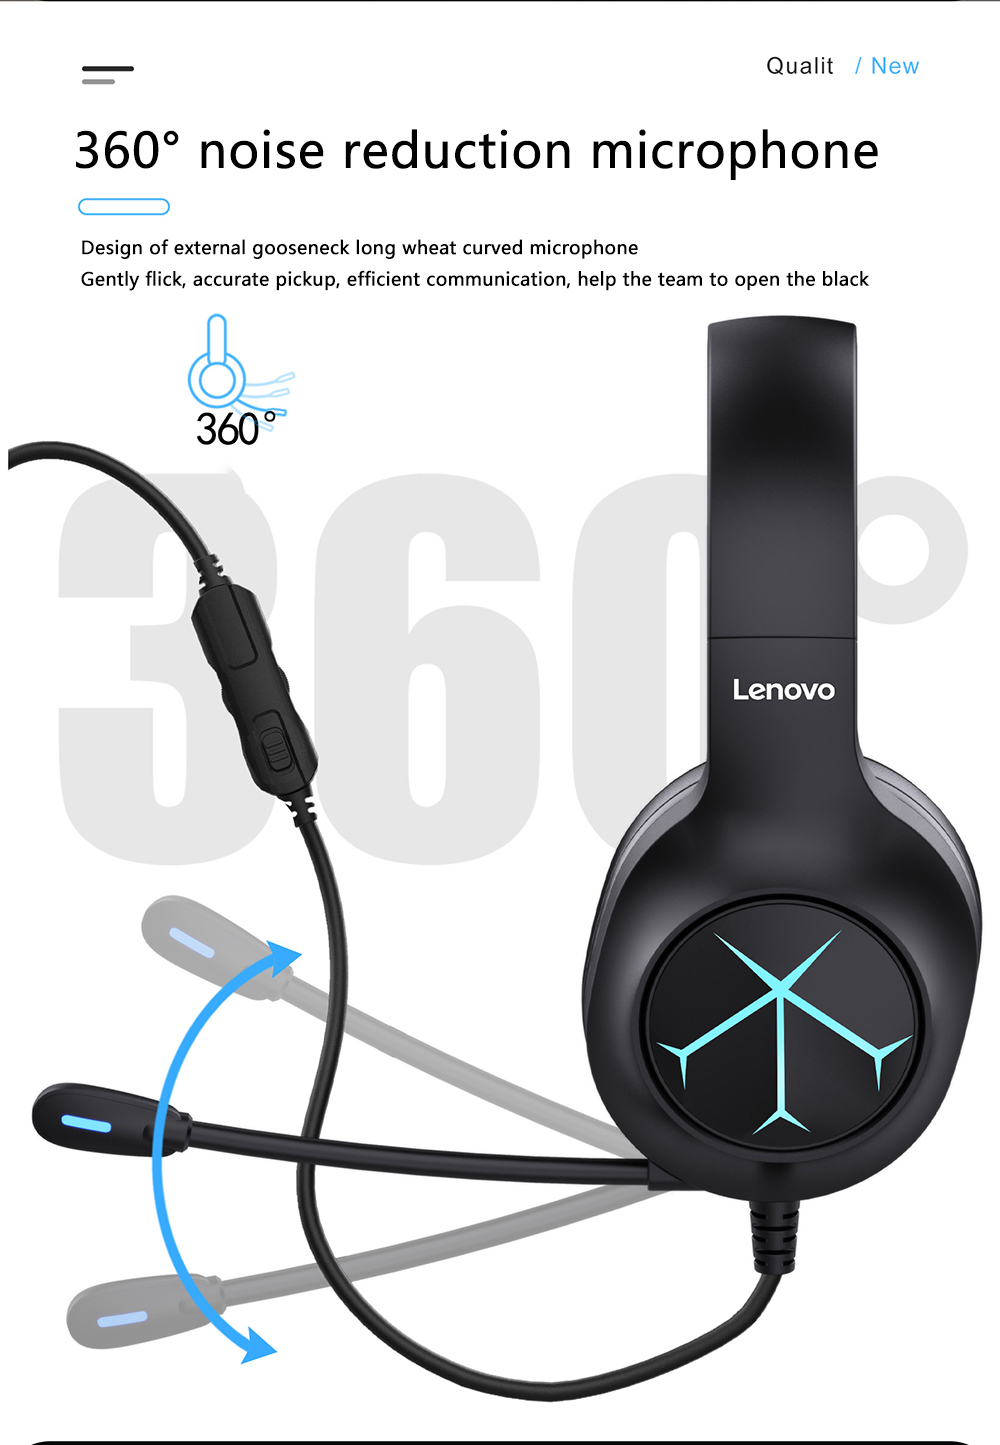 Lenovo-G60-Wired-Gaming-Headset-71-Stereo-Blue-Light-Over-Ear-Gaming-Headphone-with-Mic-Noise-Cancel-1900882-5